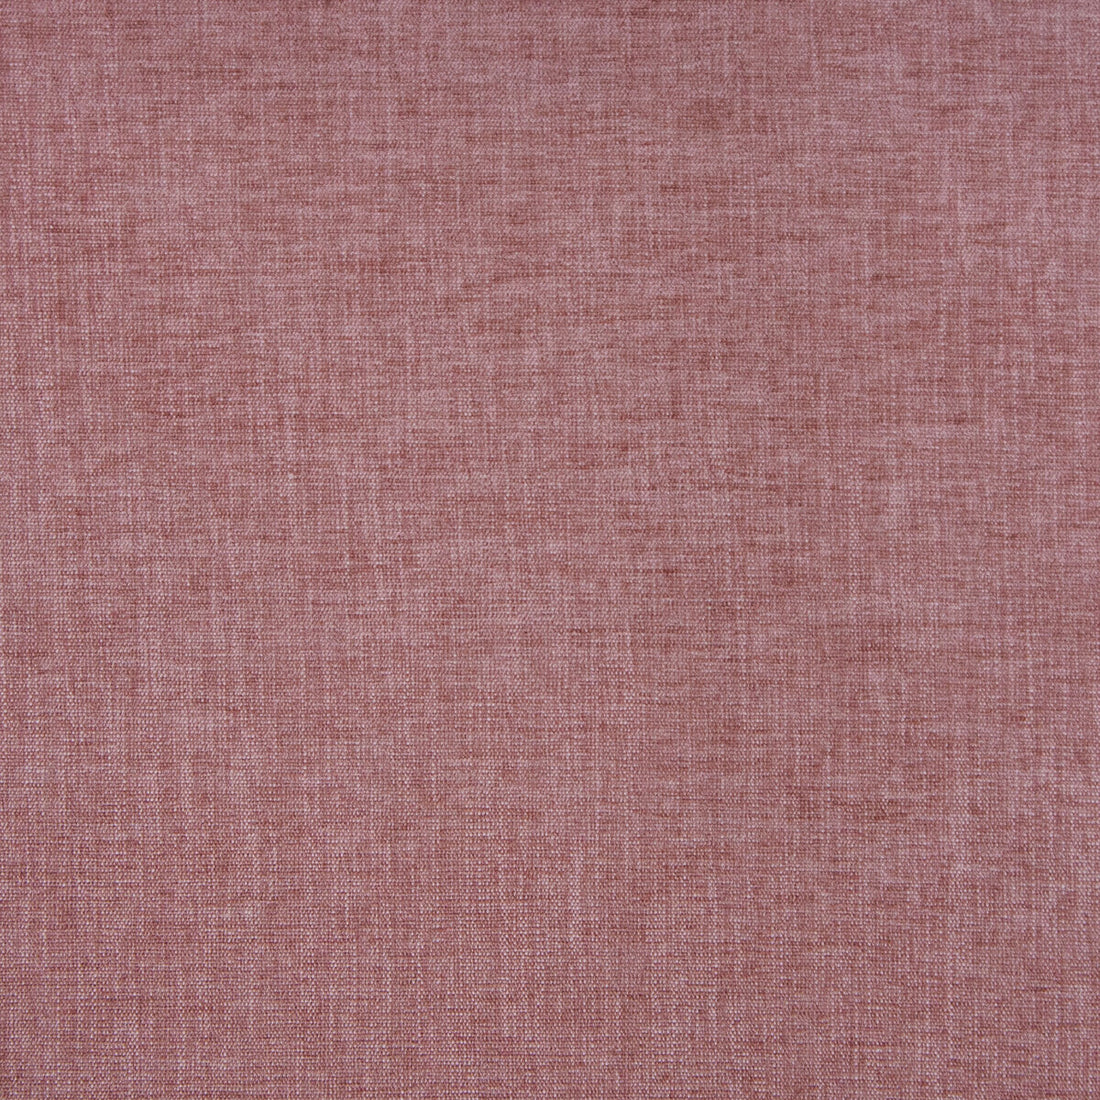 Moro fabric in rosa color - pattern GDT5670.025.0 - by Gaston y Daniela in the Gaston Maiorica collection